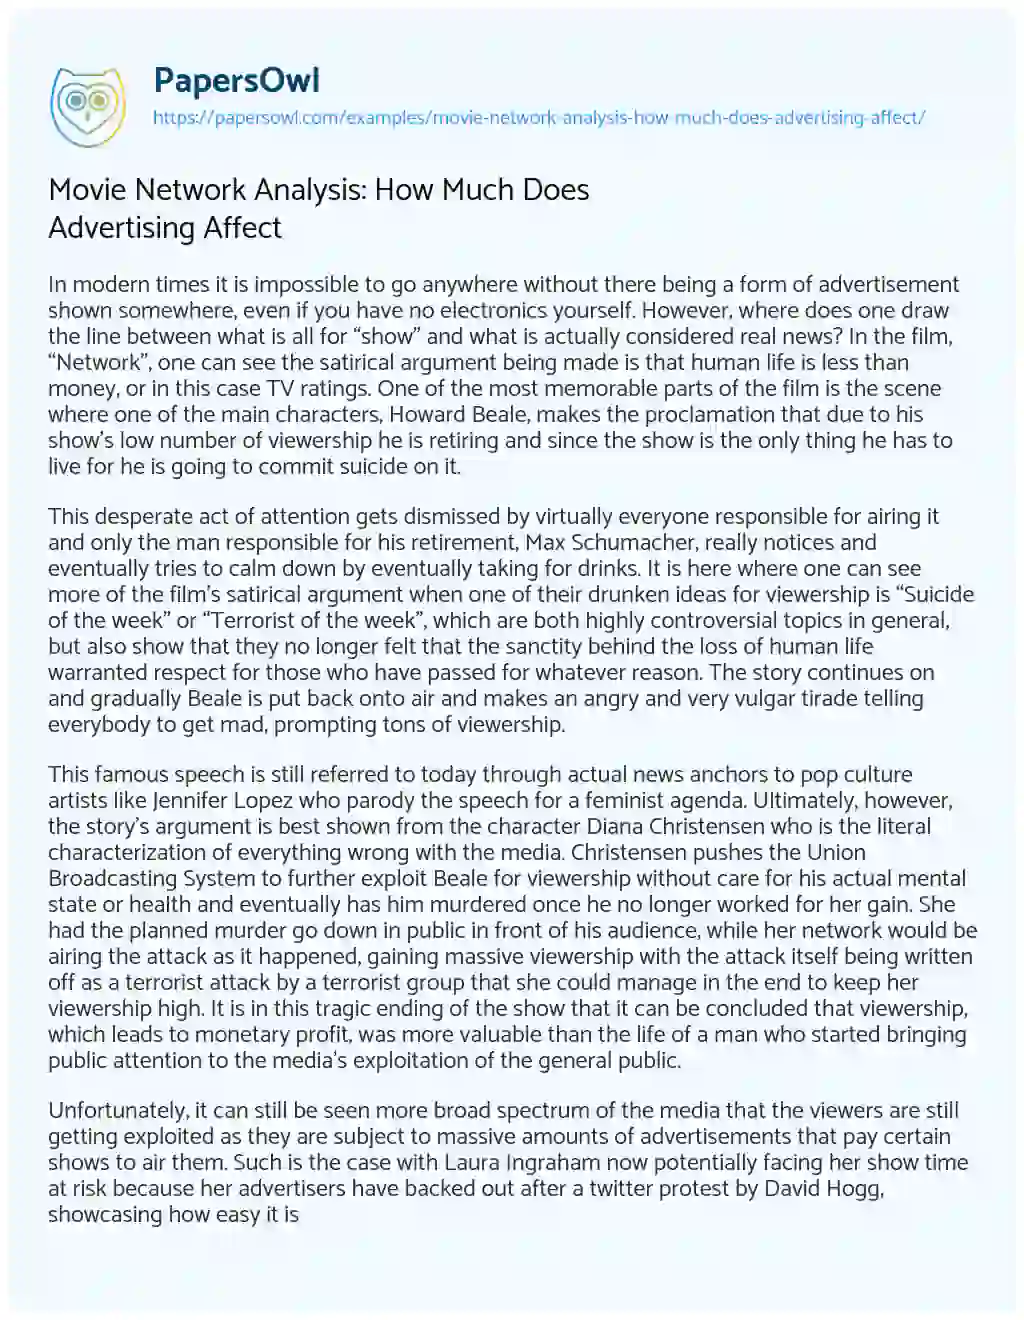 Essay on Movie Network Analysis: how Much does Advertising Affect